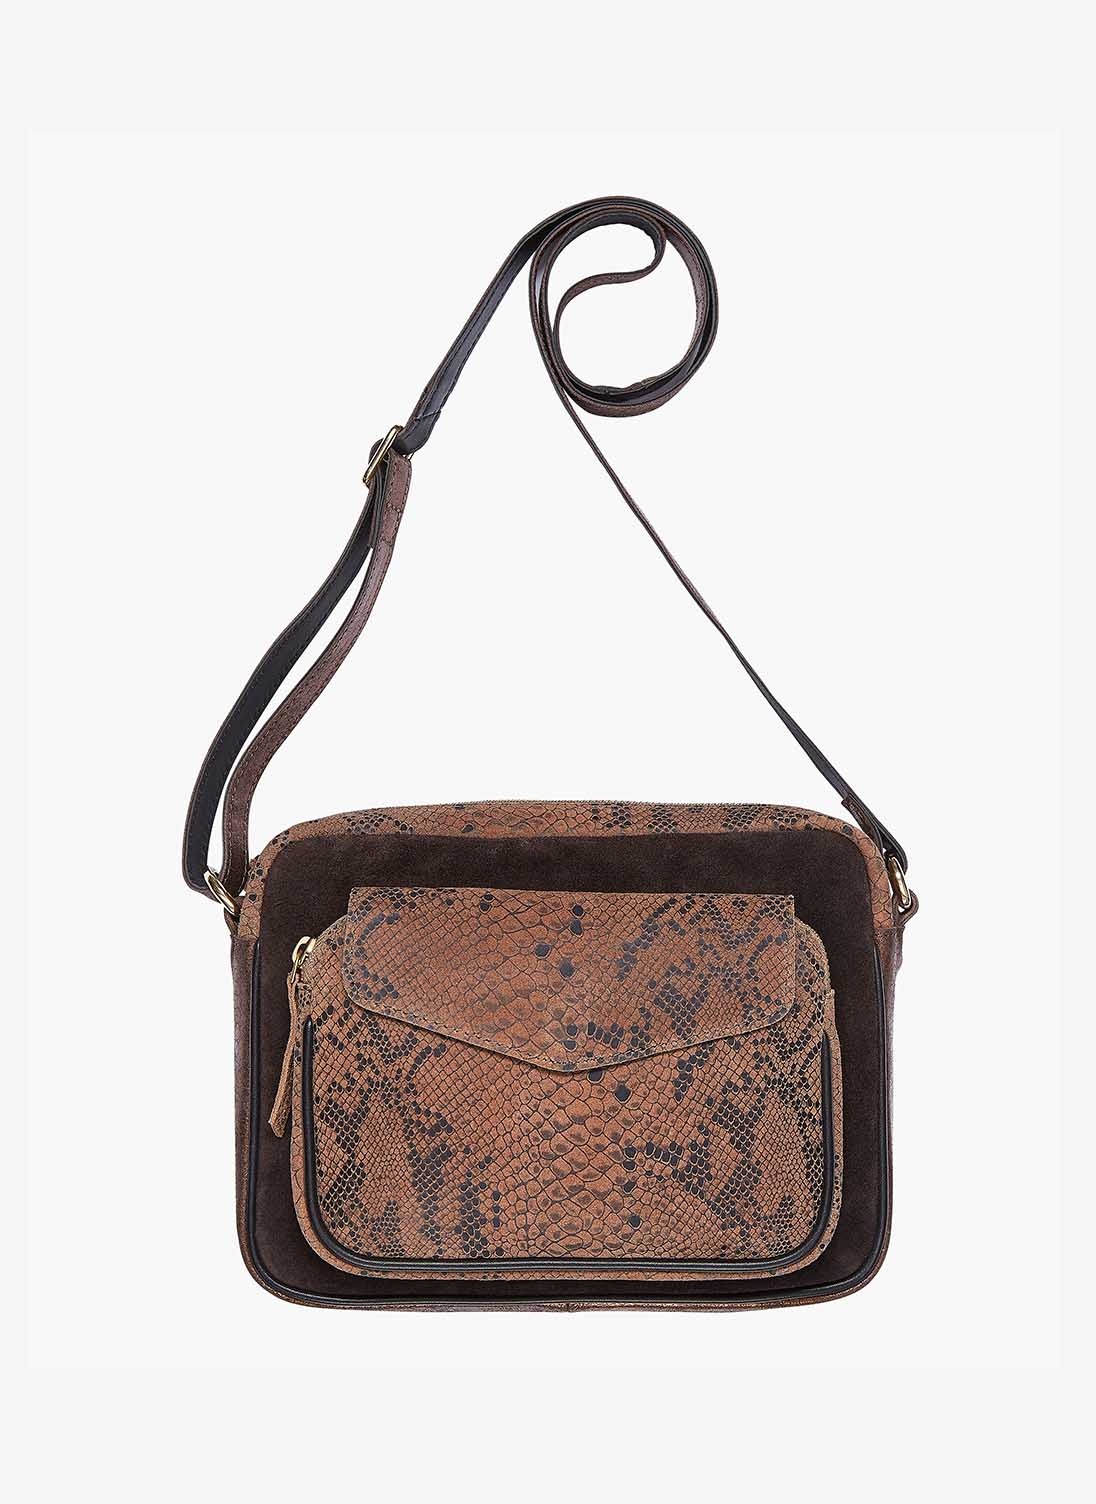 Snake Print Leather & Suede Bag Chocolate